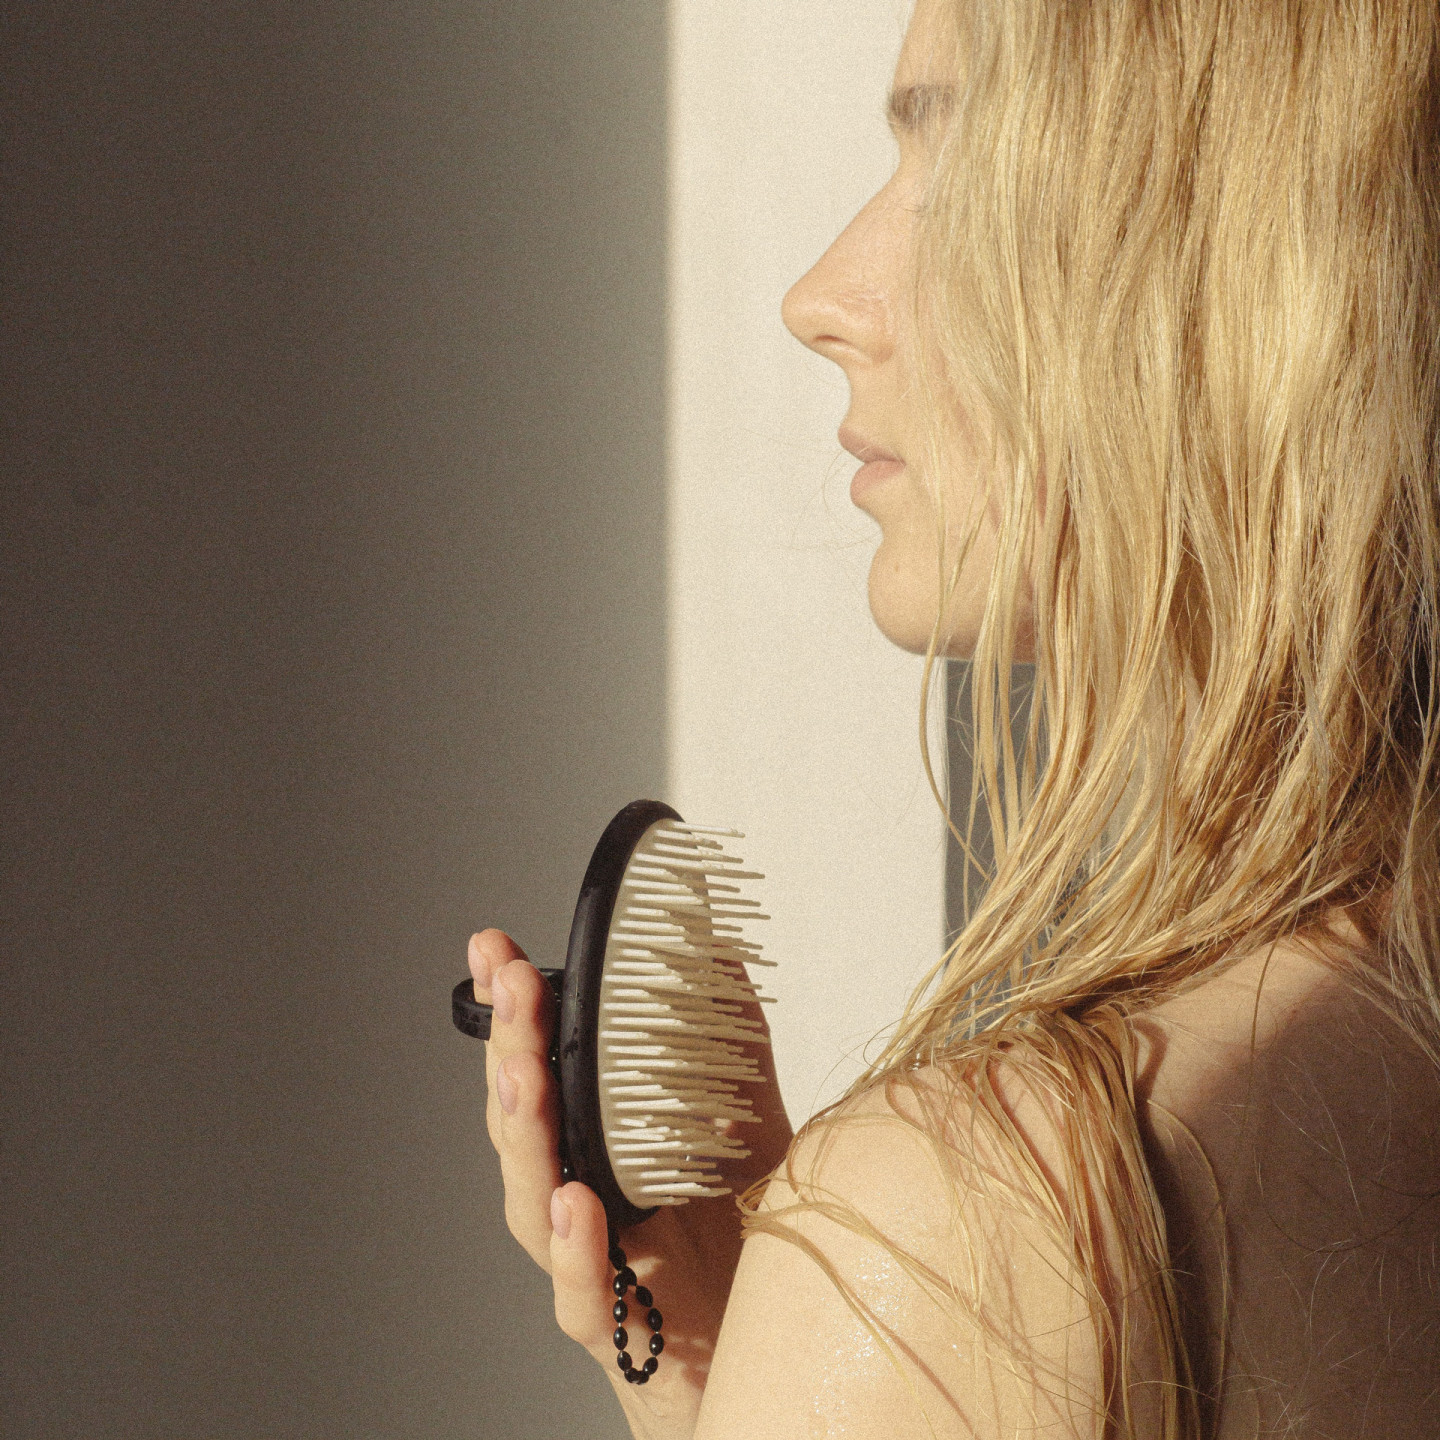 How to Clean a Hairbrush: A Step-by-Step Guide